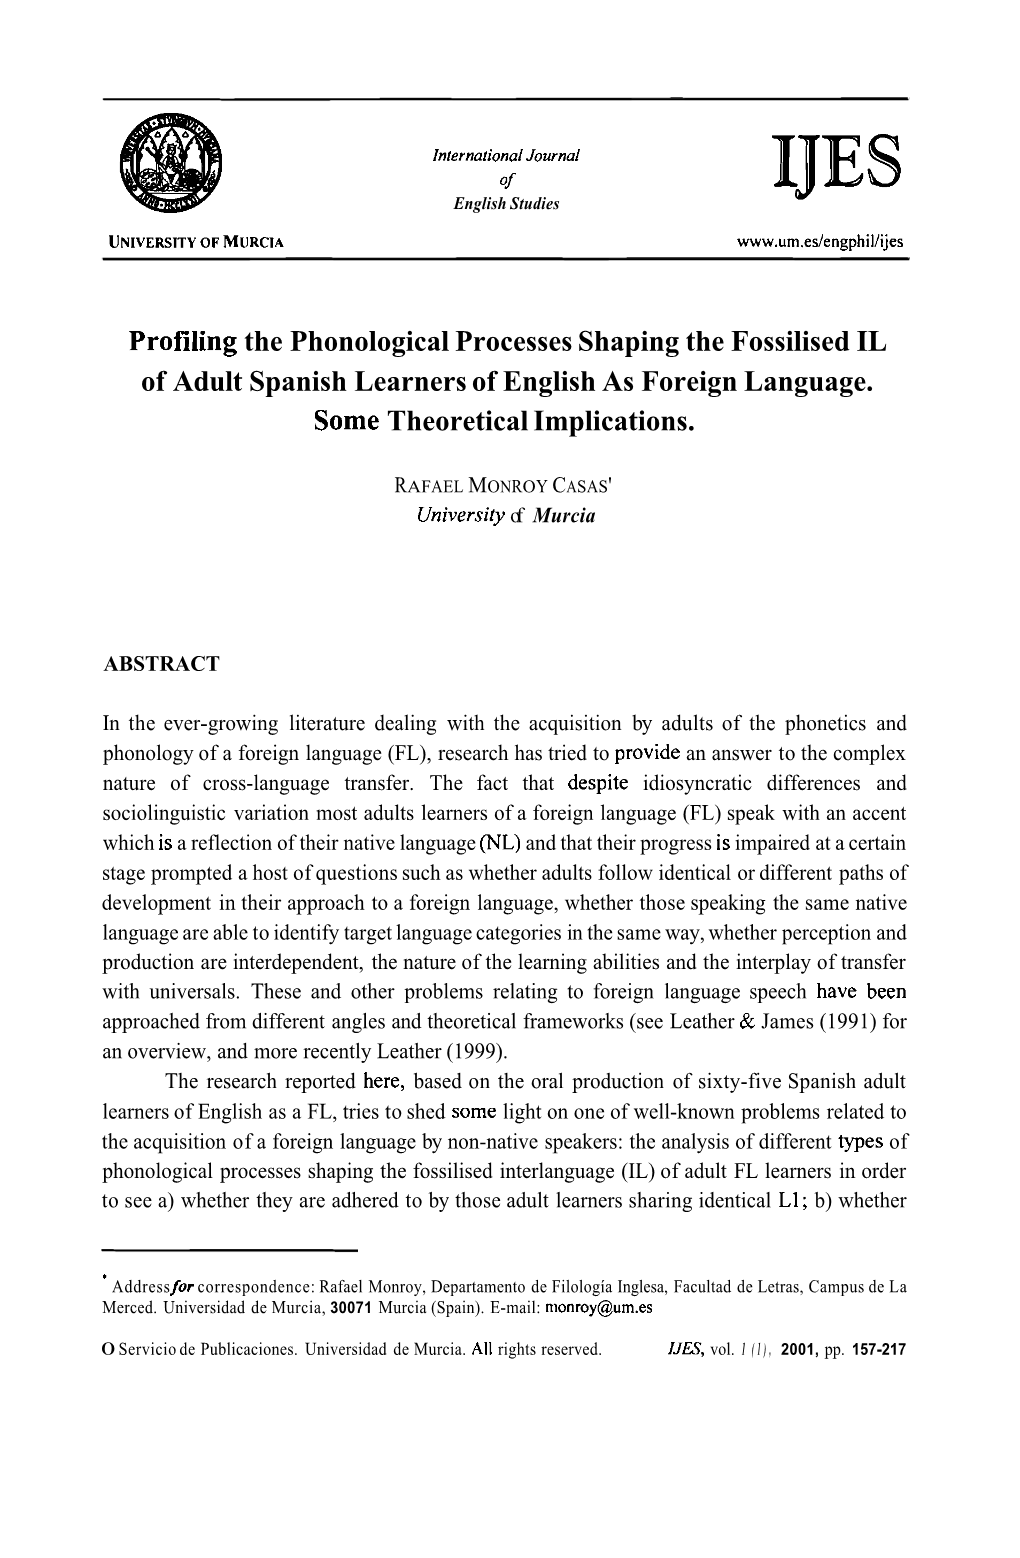 Profiling the Phonological Processes Shaping the Fossilised IL of Adult Spanish Learners of English As Foreign Language